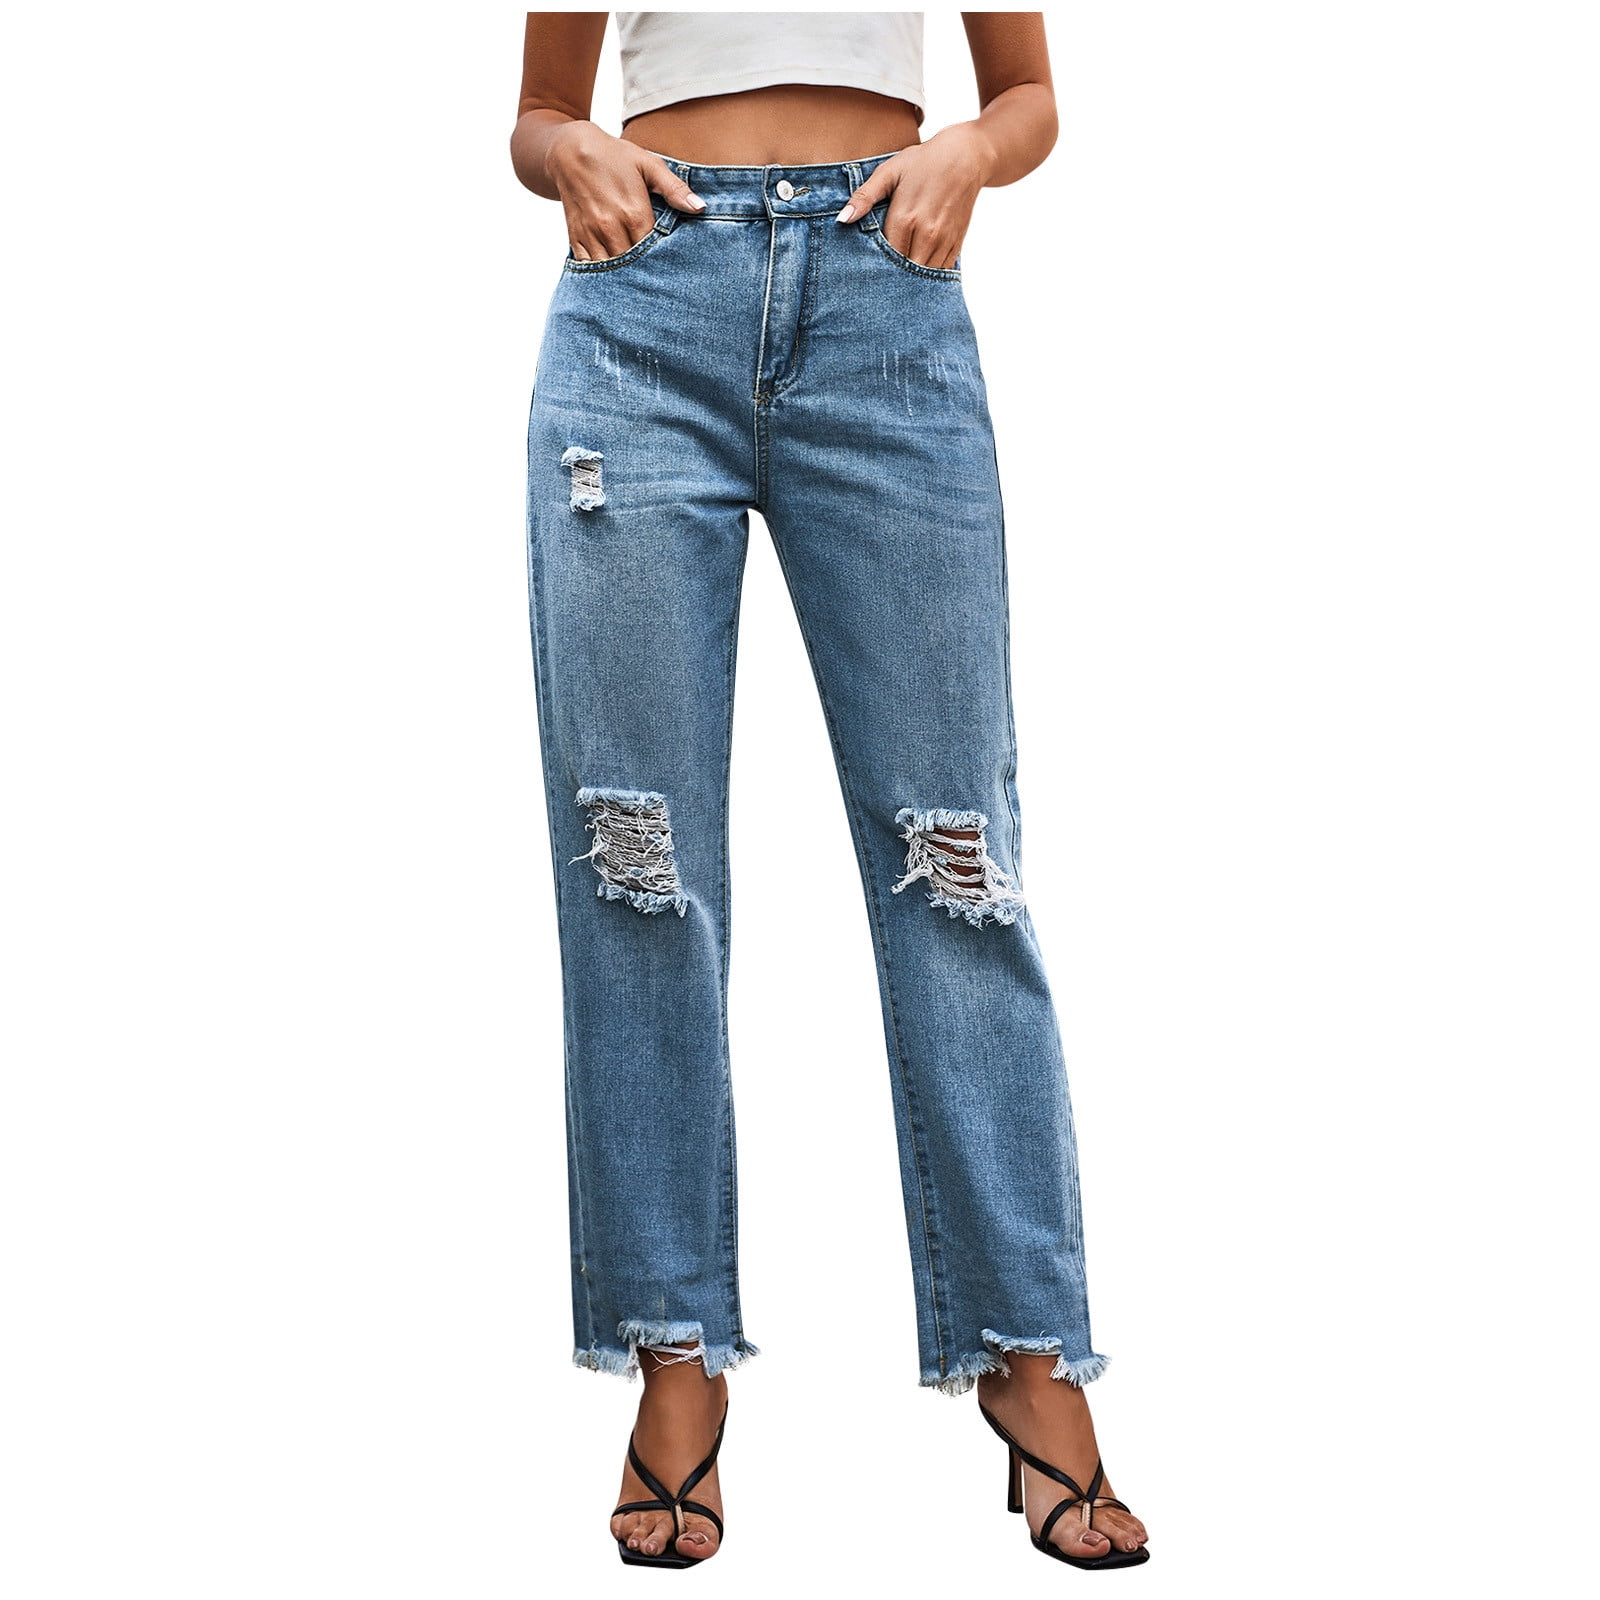 Gaecuw Womens Jeans Regular Fit Long Pants Button Up Zipper Lounge Trousers  Ripped Pants Loose Baggy Jeans Mid Waisted Denim Summer Ankle Length Pants  with Pockets Straight Leg Solid Denim Pants 